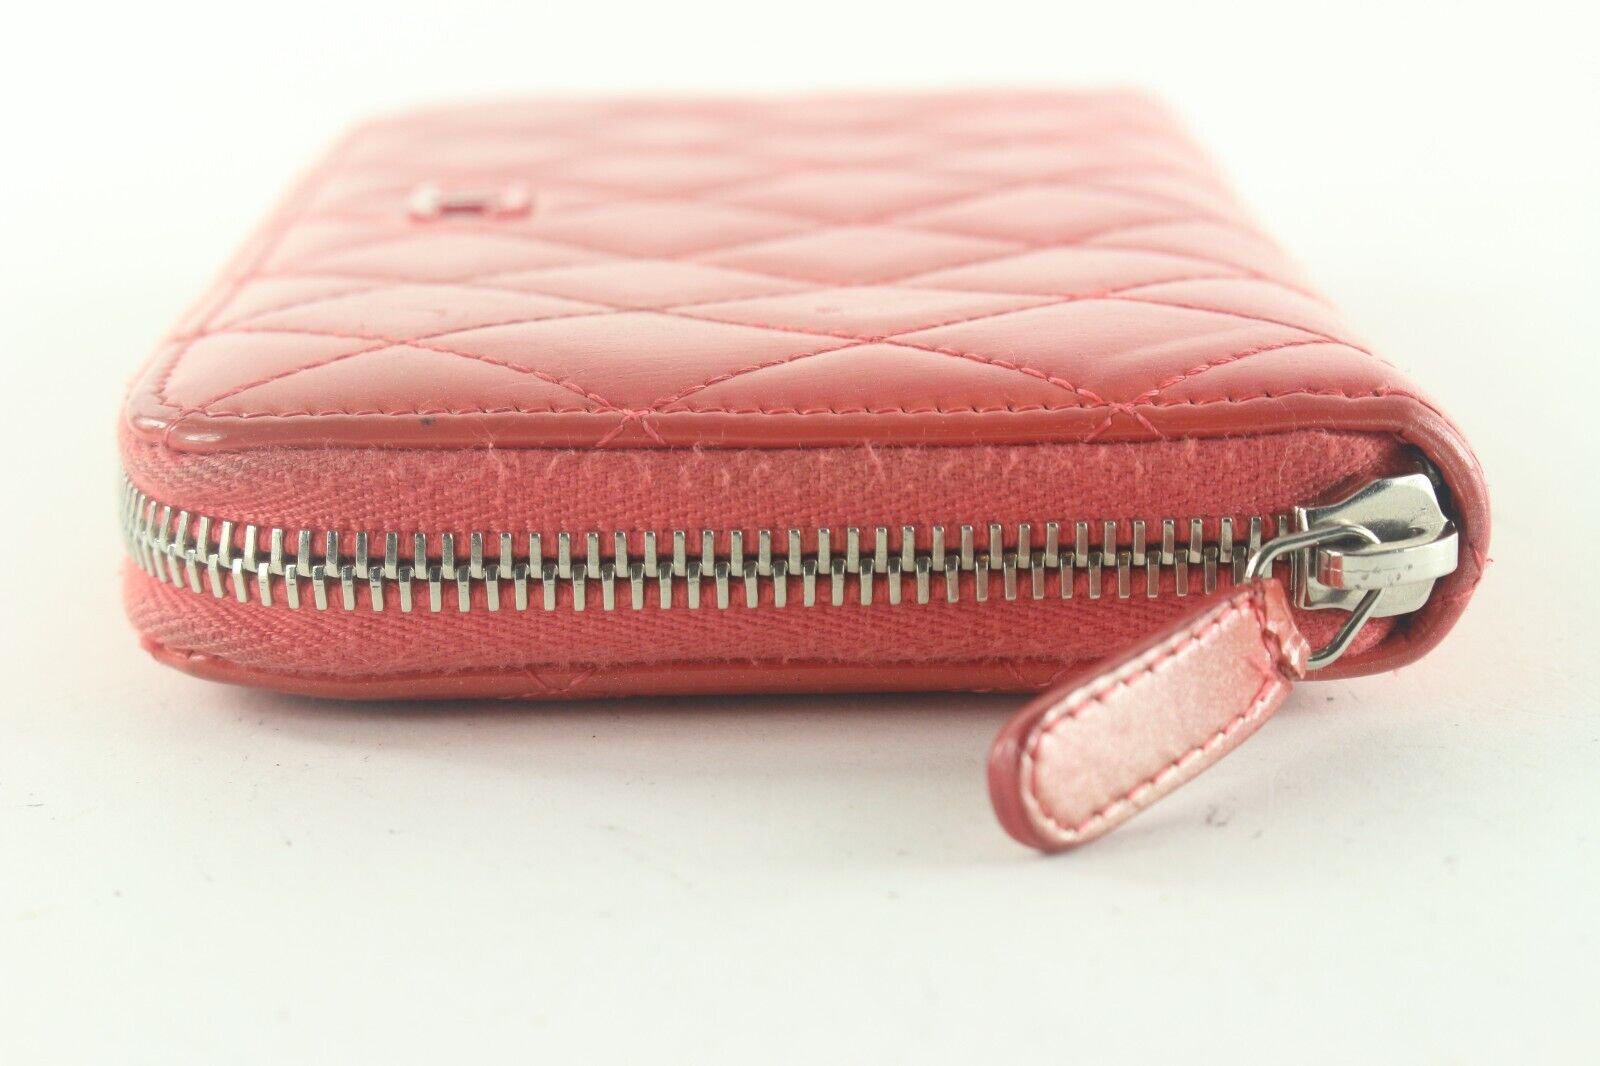 Chanel Small Zip Around Coin Purse Card Holder in Pink Iridescent